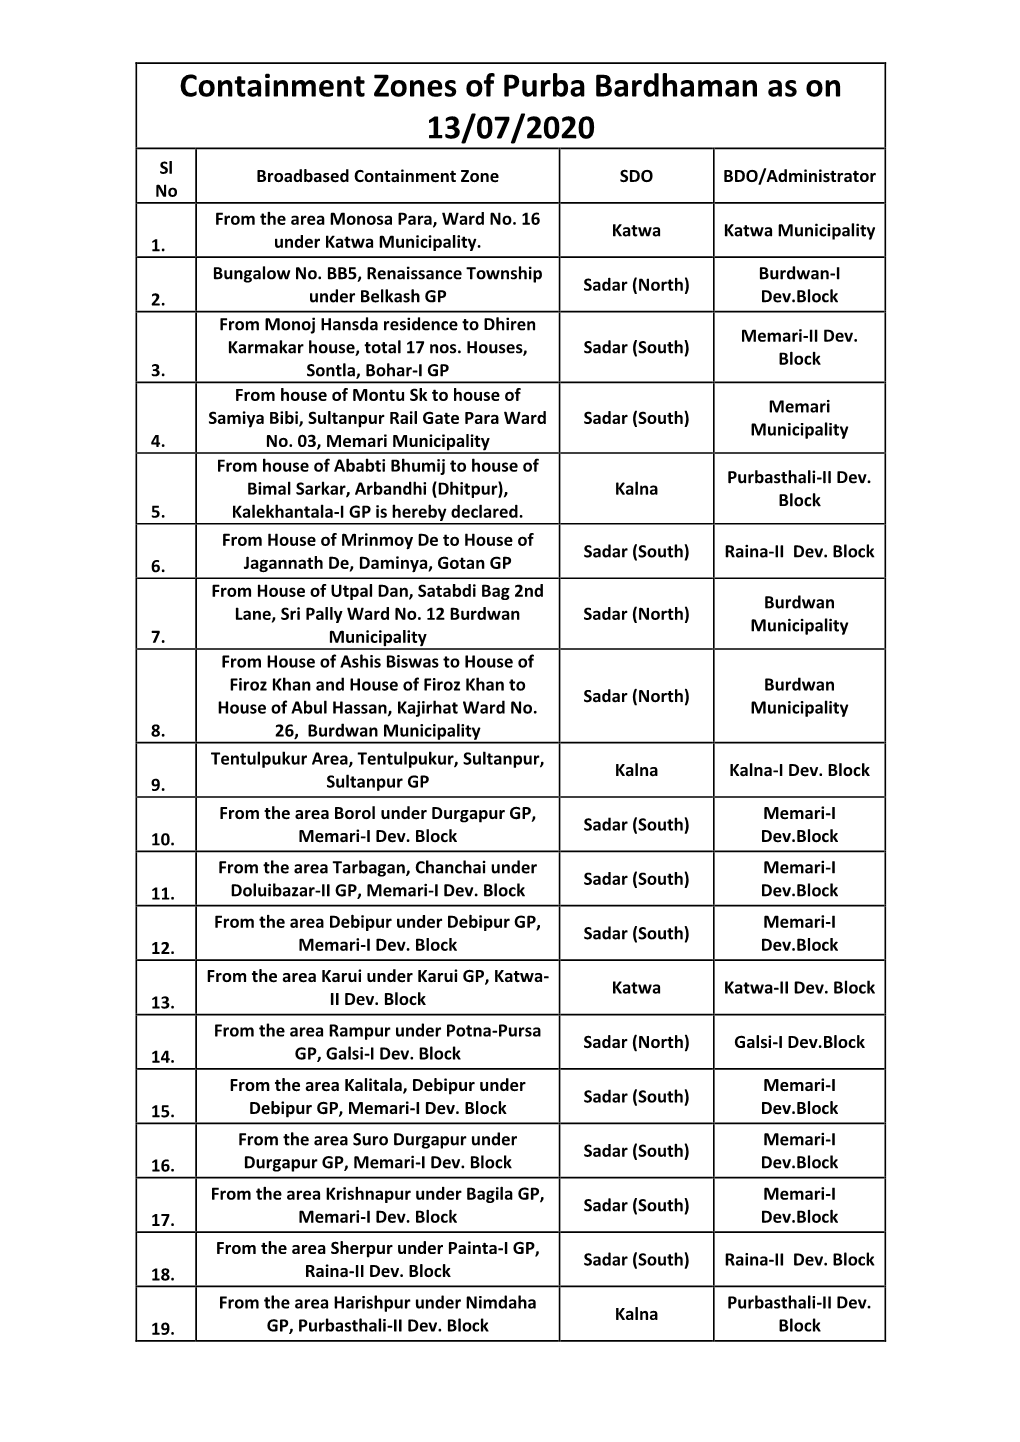 Containment Zones of Purba Bardhaman As on 13/07/2020